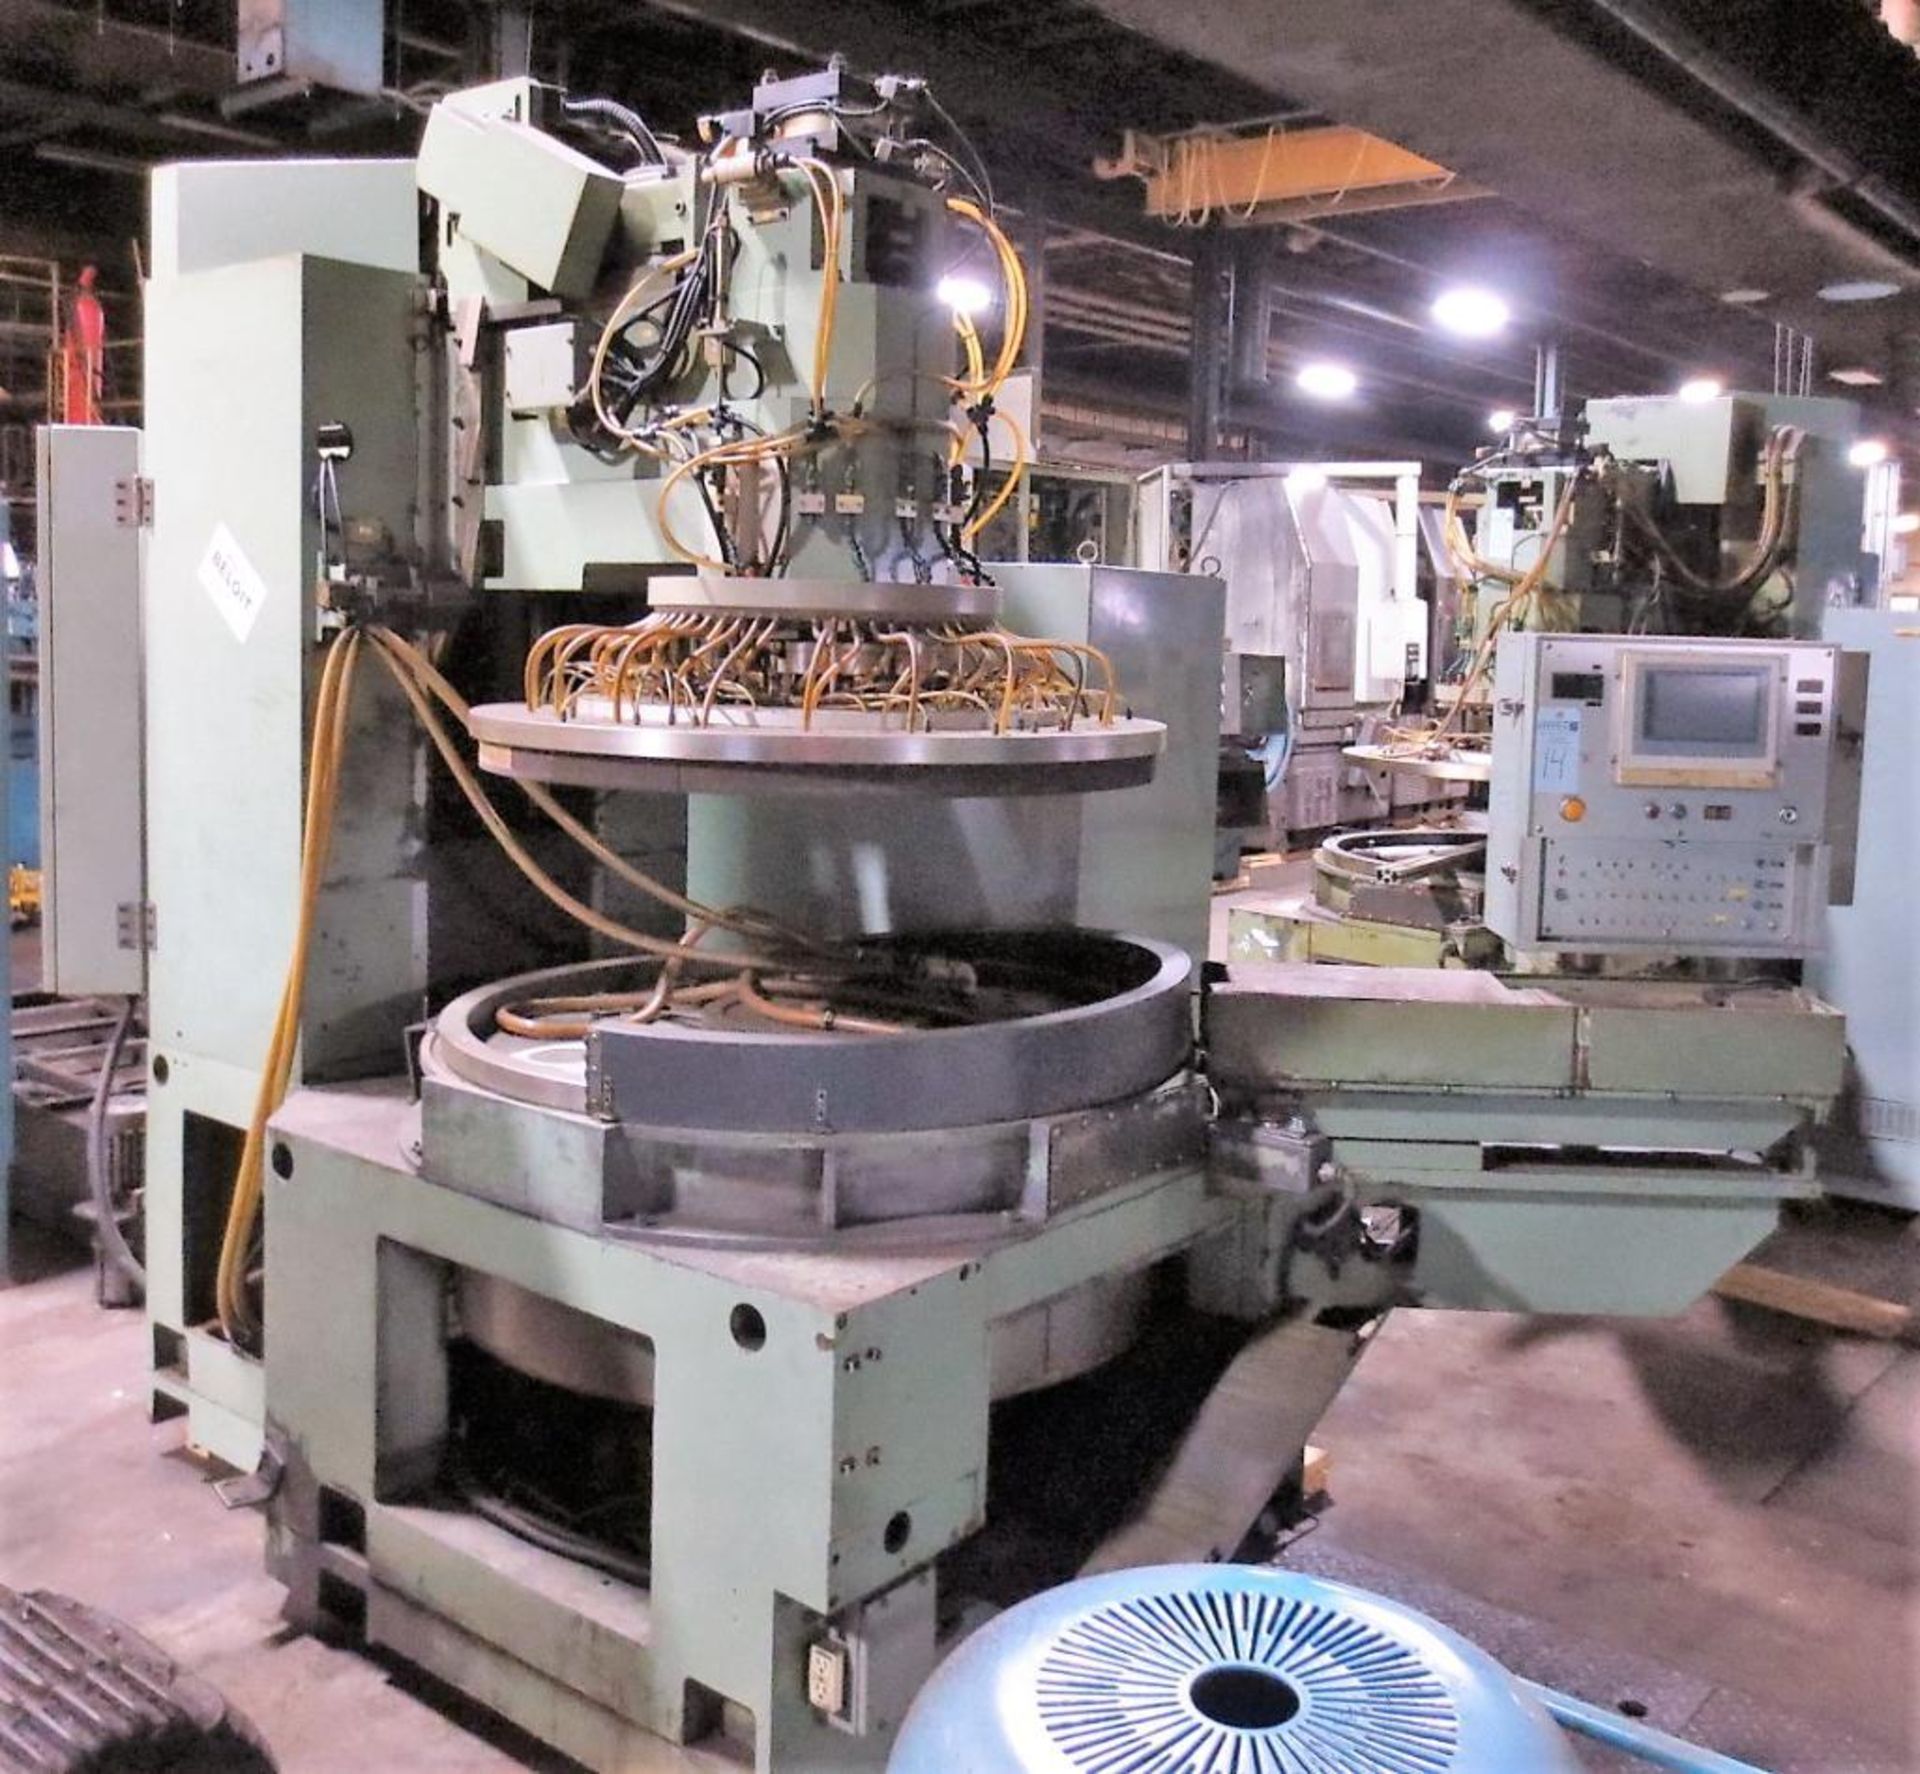 SSC System Seiko Vertical Lapping Machine S/N: N/A (1995) CNC Control. Loading Fee is $850.00